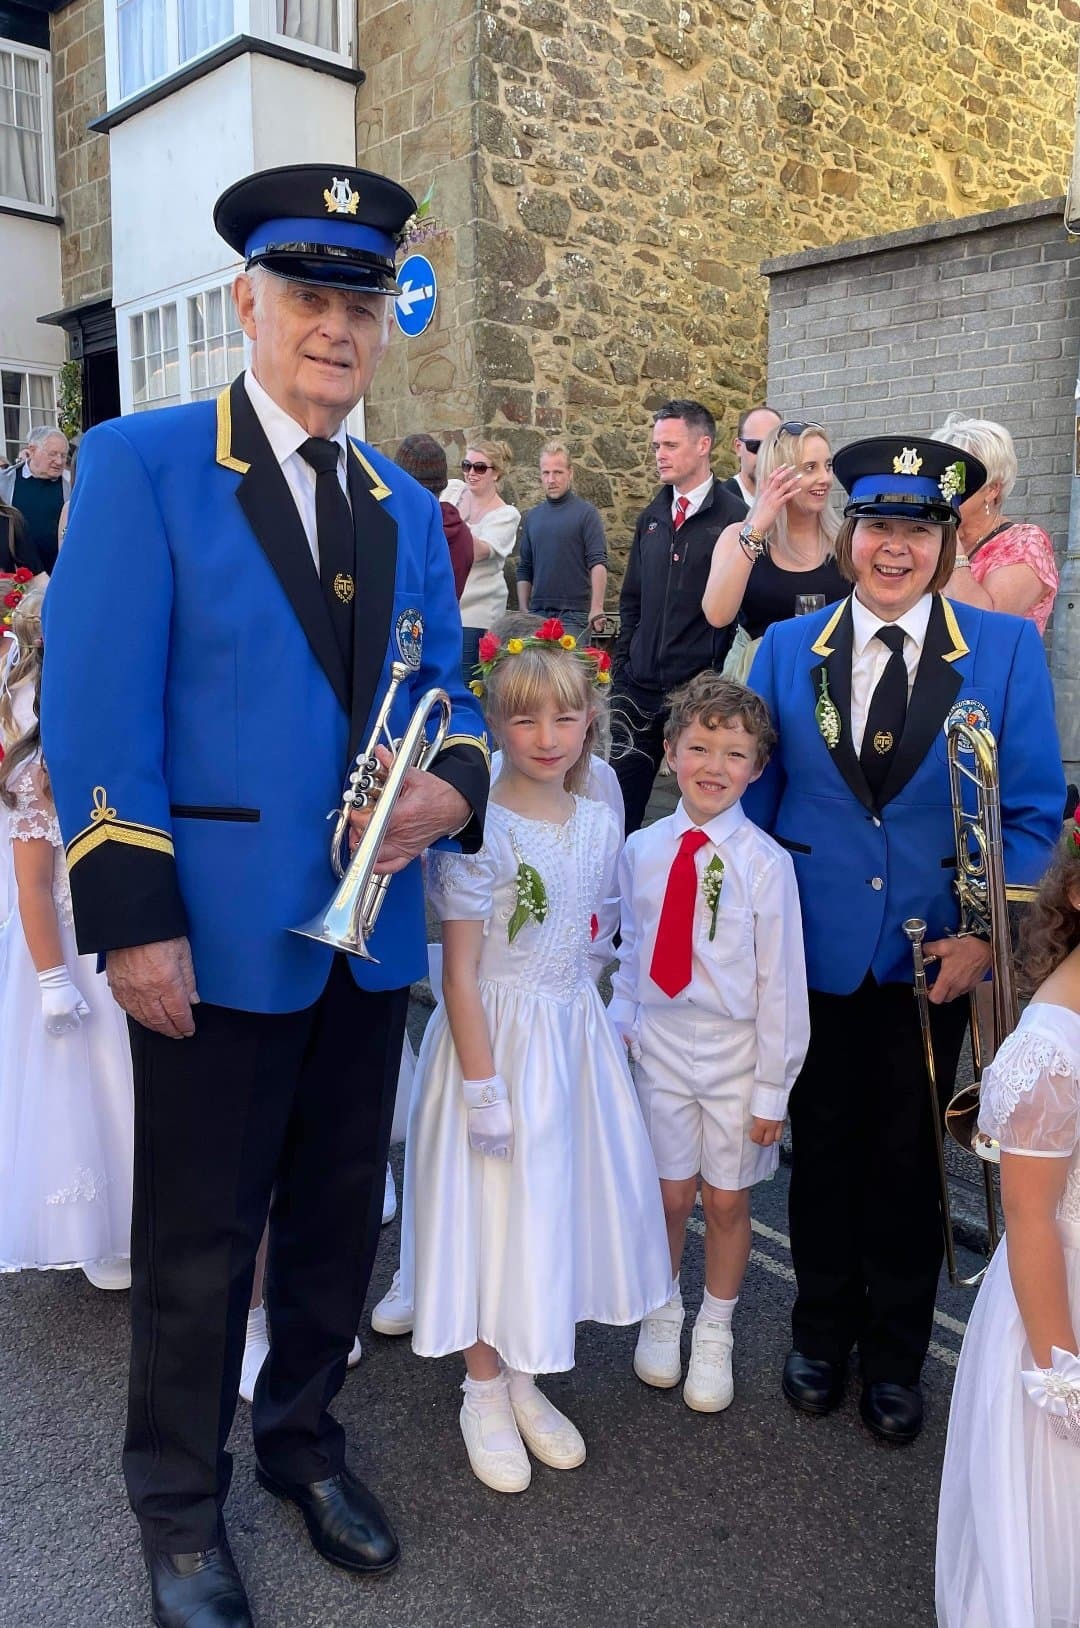 Russell with great-granddaughter Olivia and her dance partner Iwan, whose grandmother Ann Pascoe is also in the band